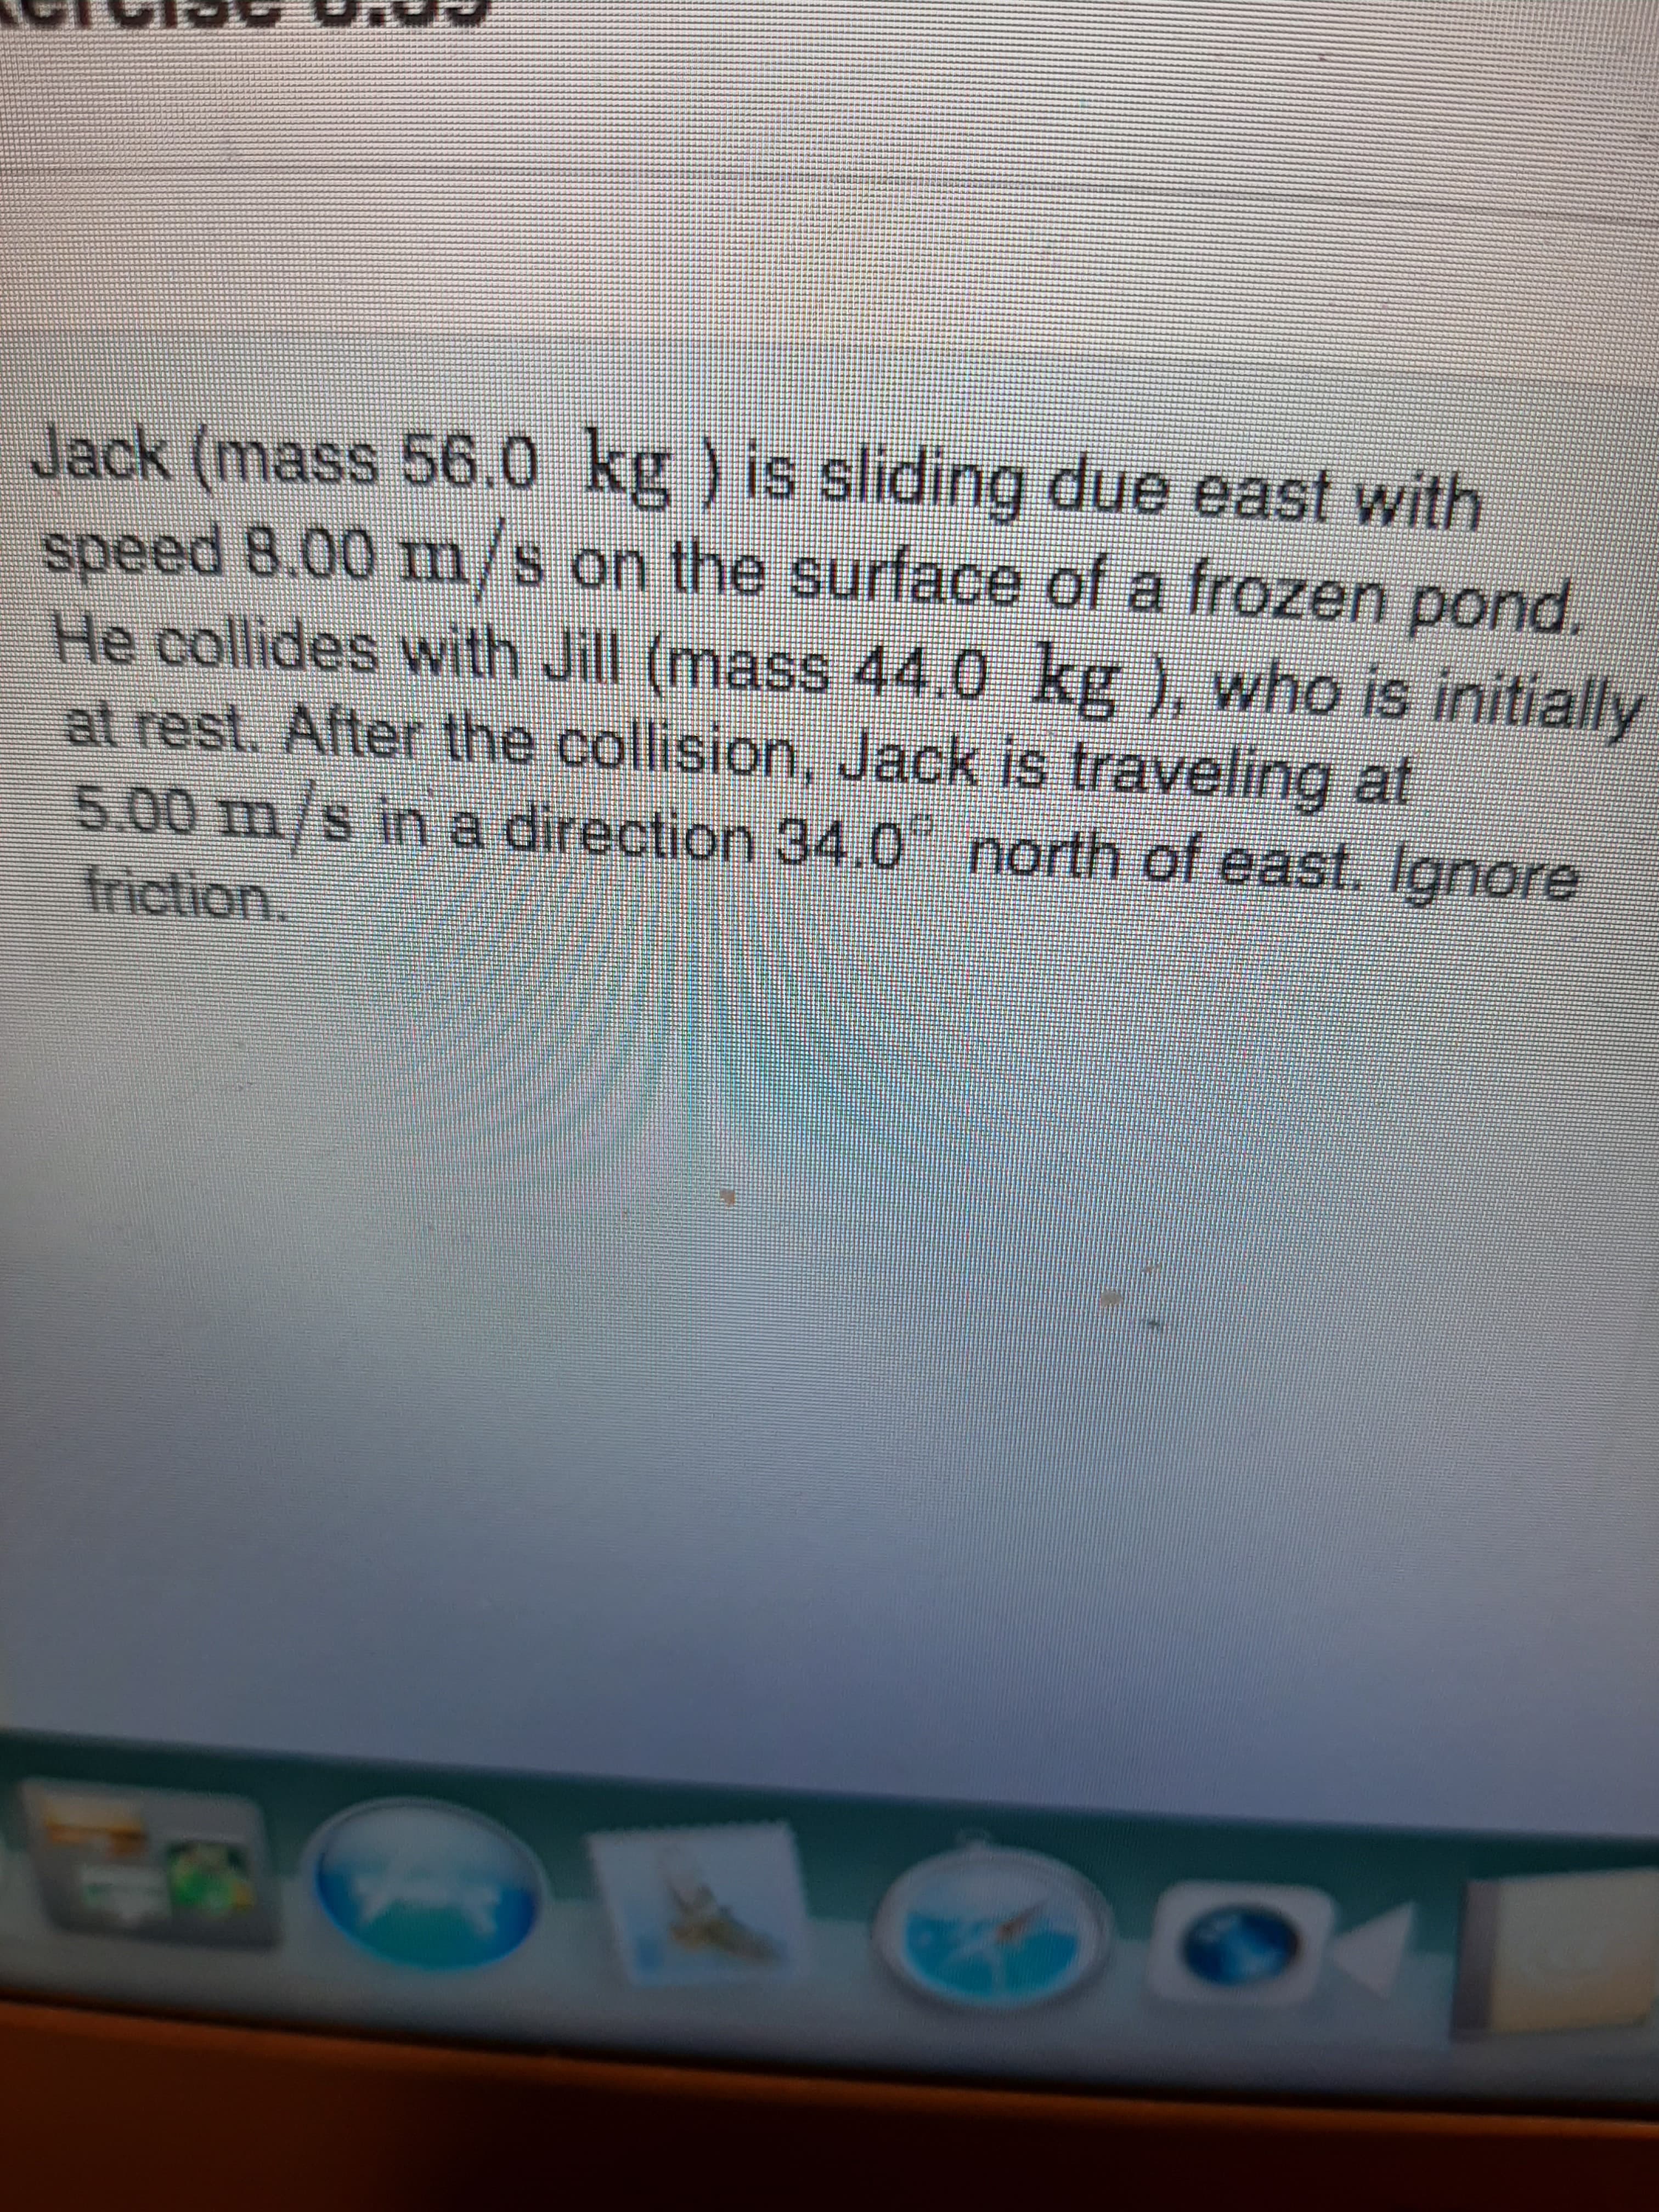 Jack (mass 56.0 kg ) is sliding due east with
speed 8.00 m/s on the surface of a frozen pond.
He collides with Jill (mass 44,0
at rest. After the collision, Jack is traveling at
IS
kg), who is initially
5.00 m/s iin a direction 34.0" north of east. lgnore
friction..
